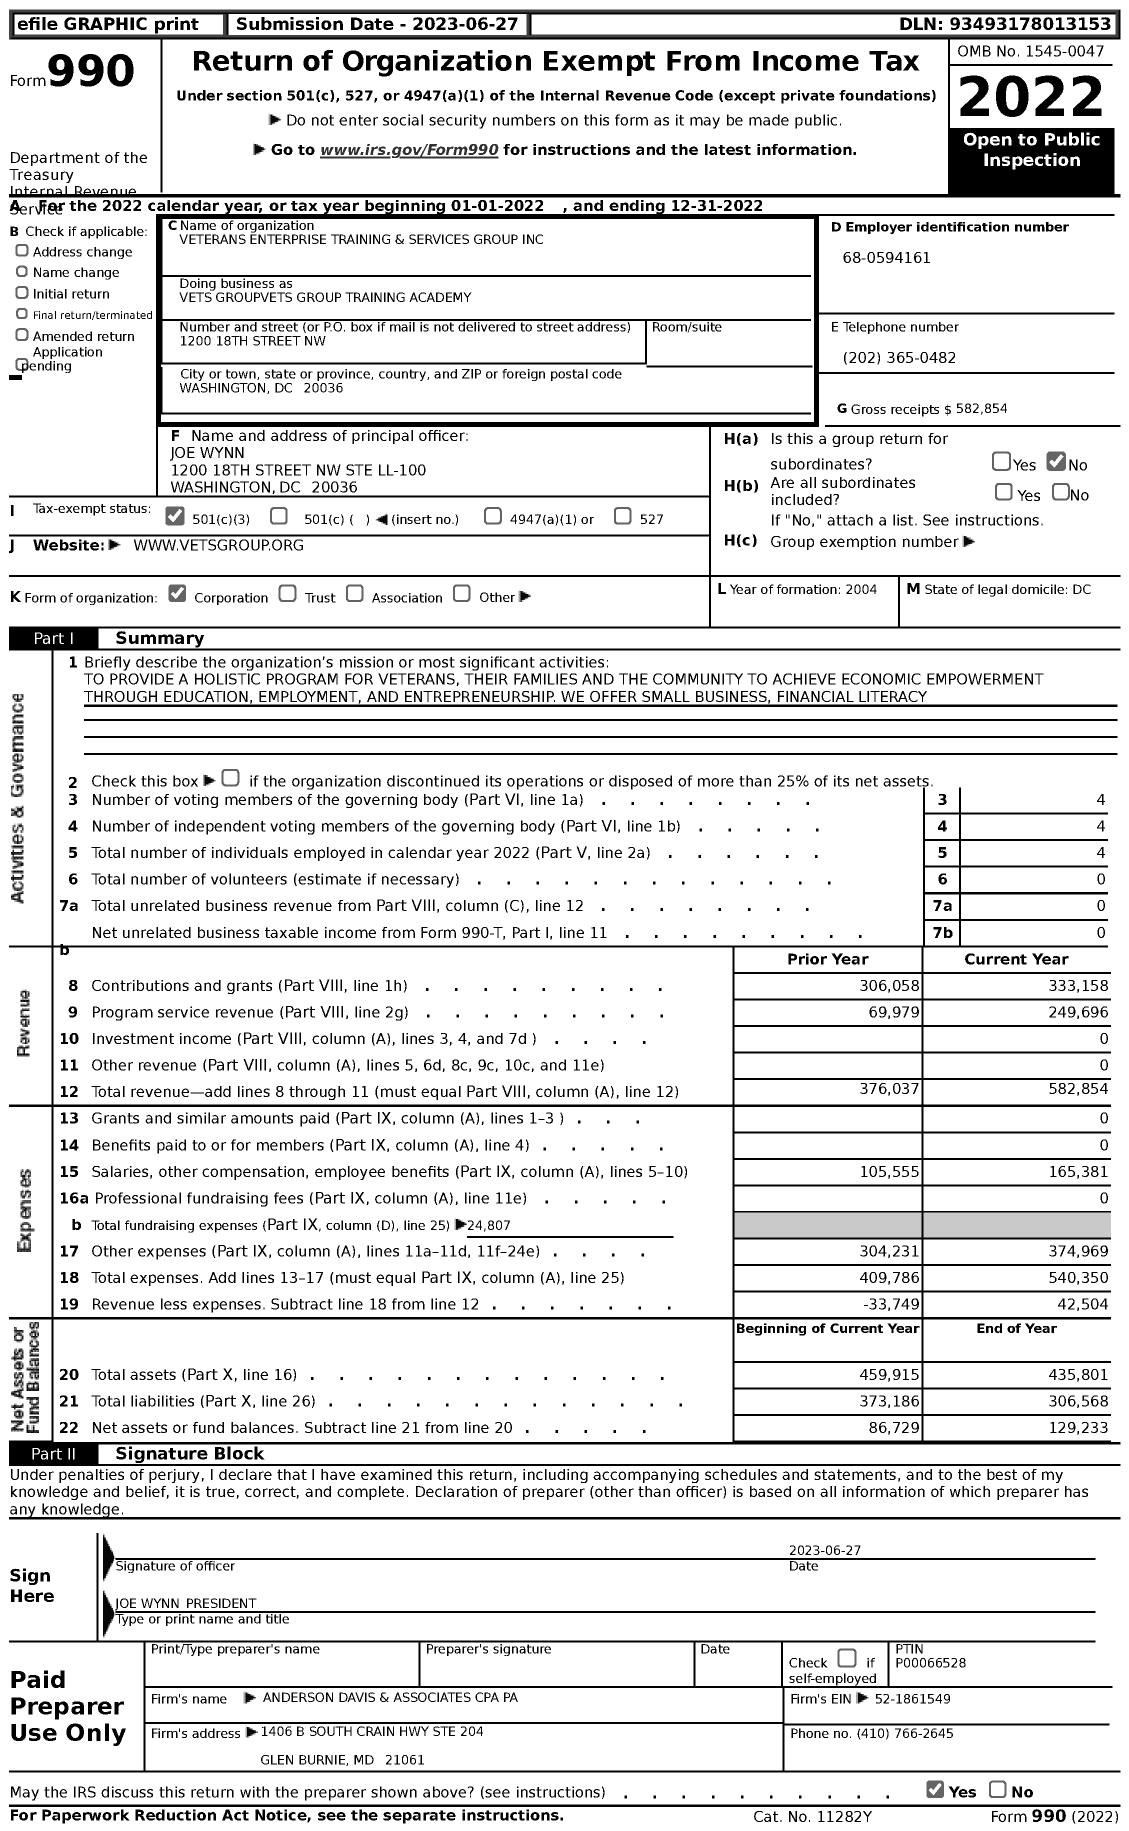 Image of first page of 2022 Form 990 for Vets Groupvets Group Training Academy